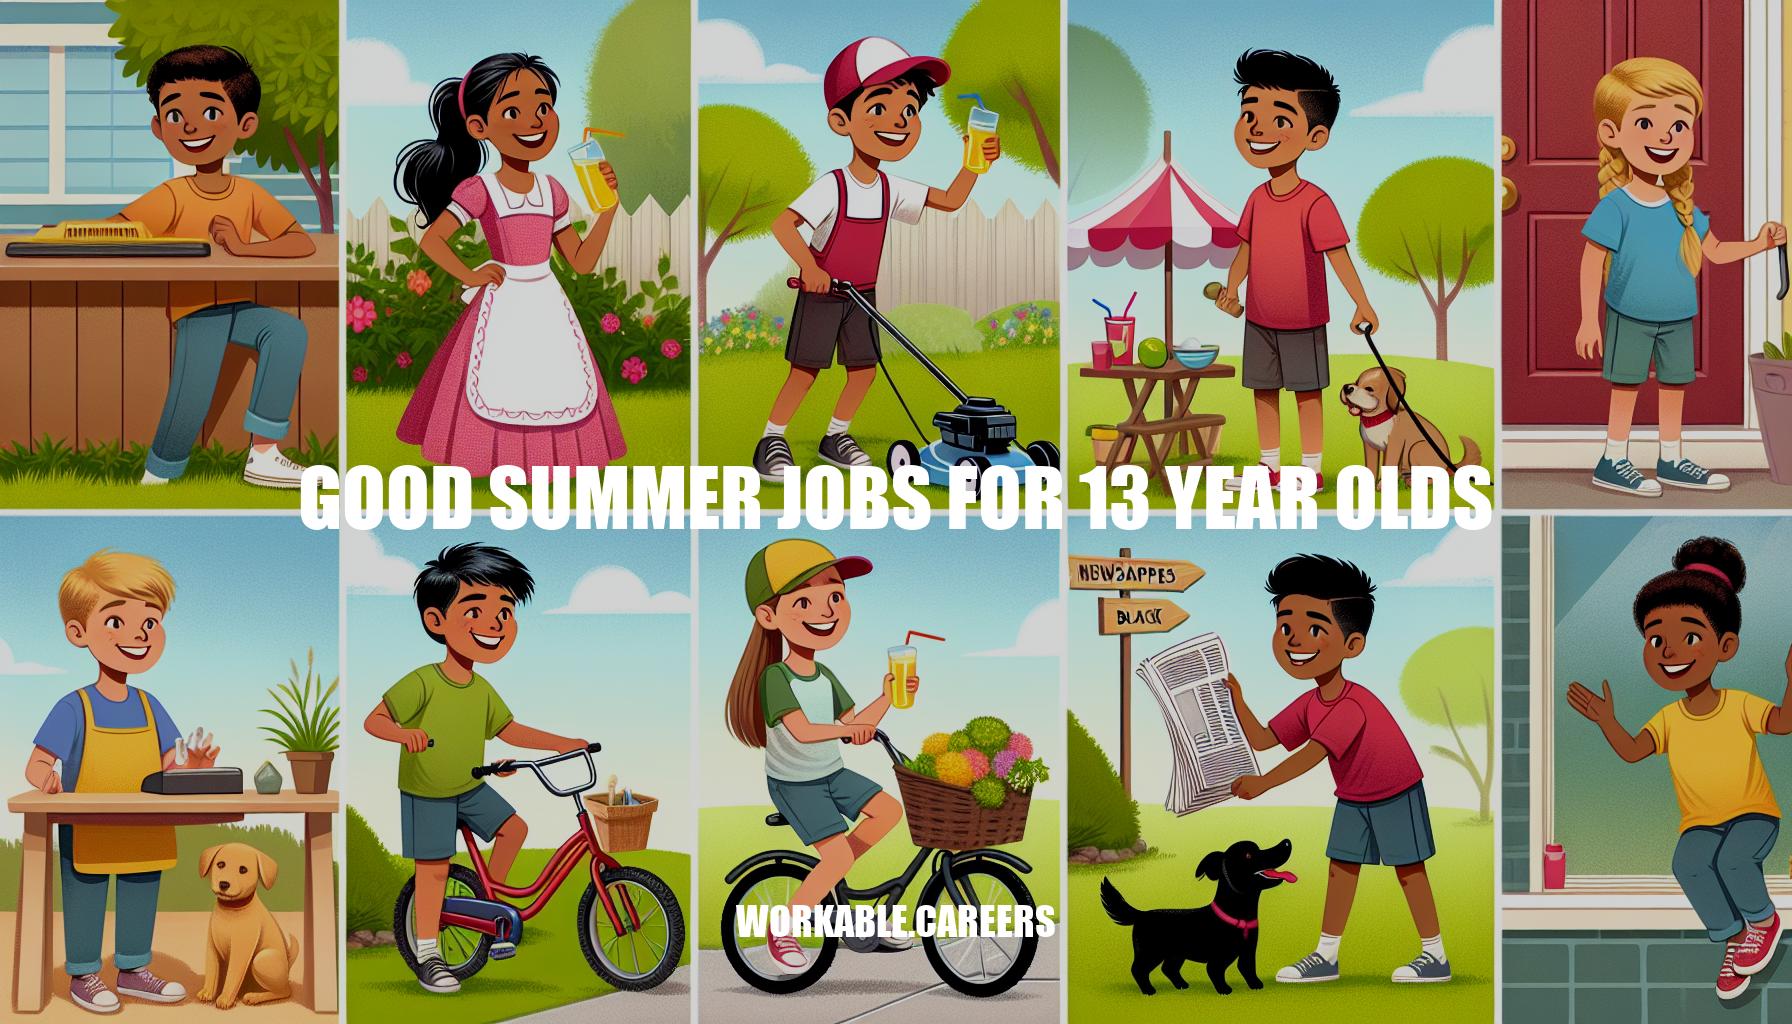 Good Summer Jobs for 13 Year Olds